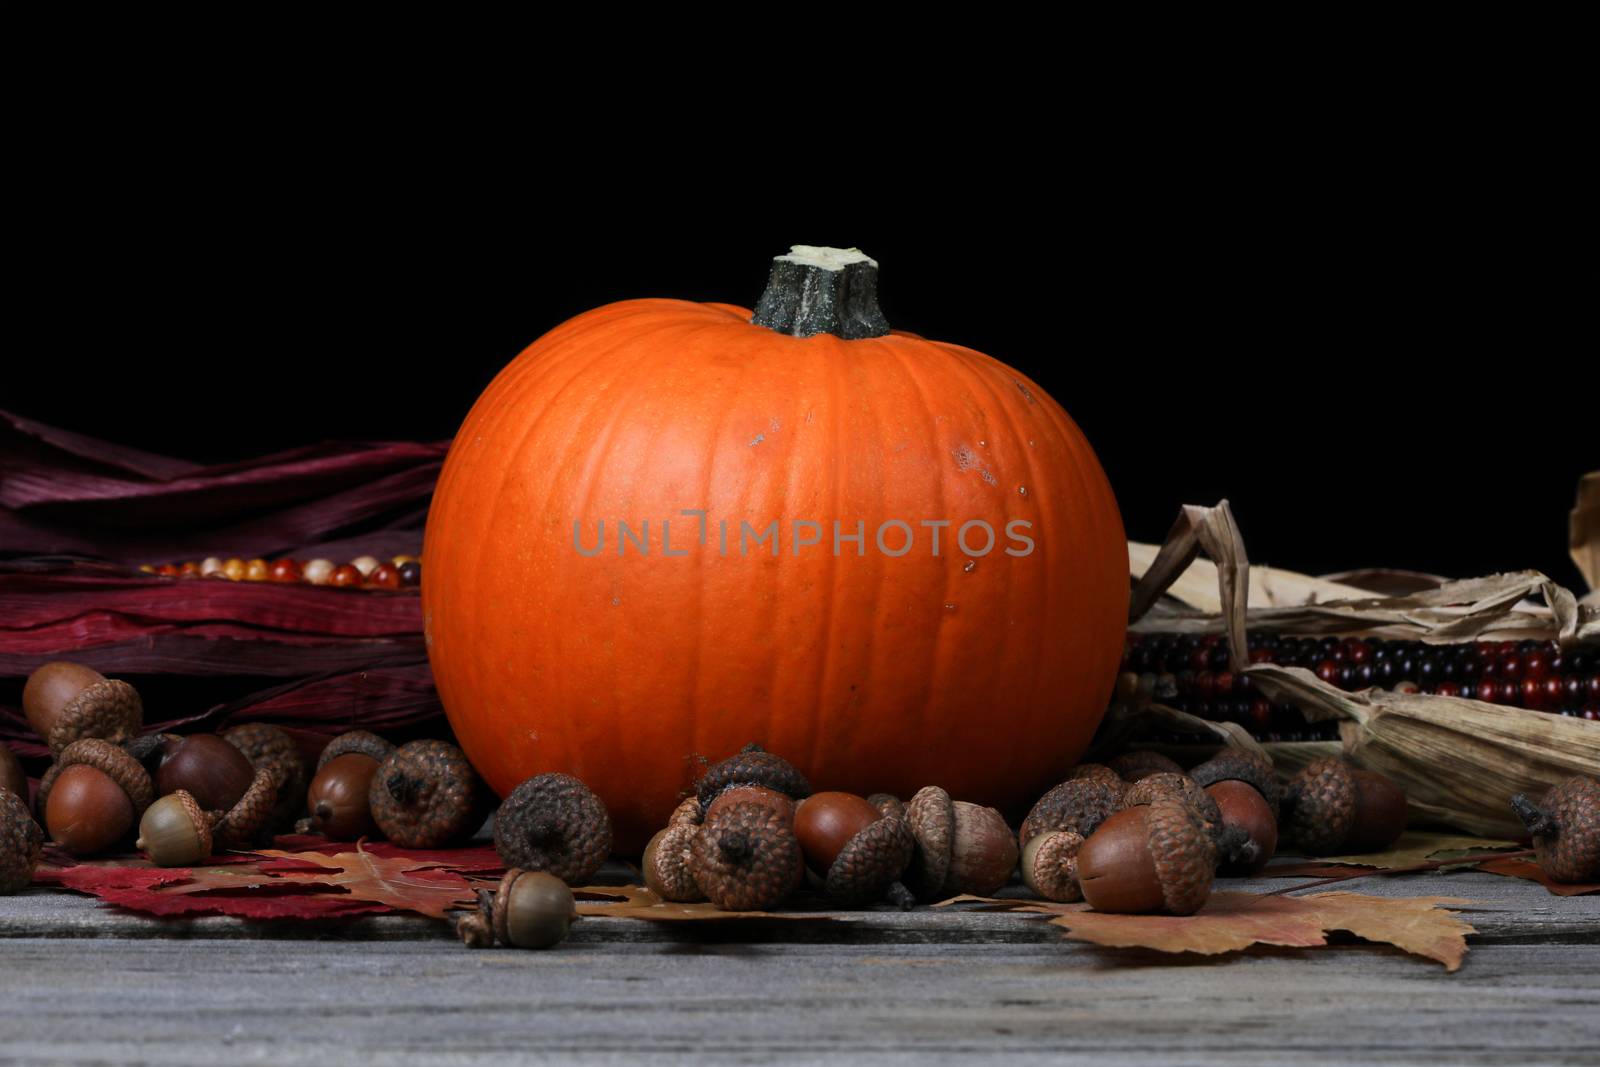 Pumpkin for Thanksgiving or Halloween holiday with dark background setting